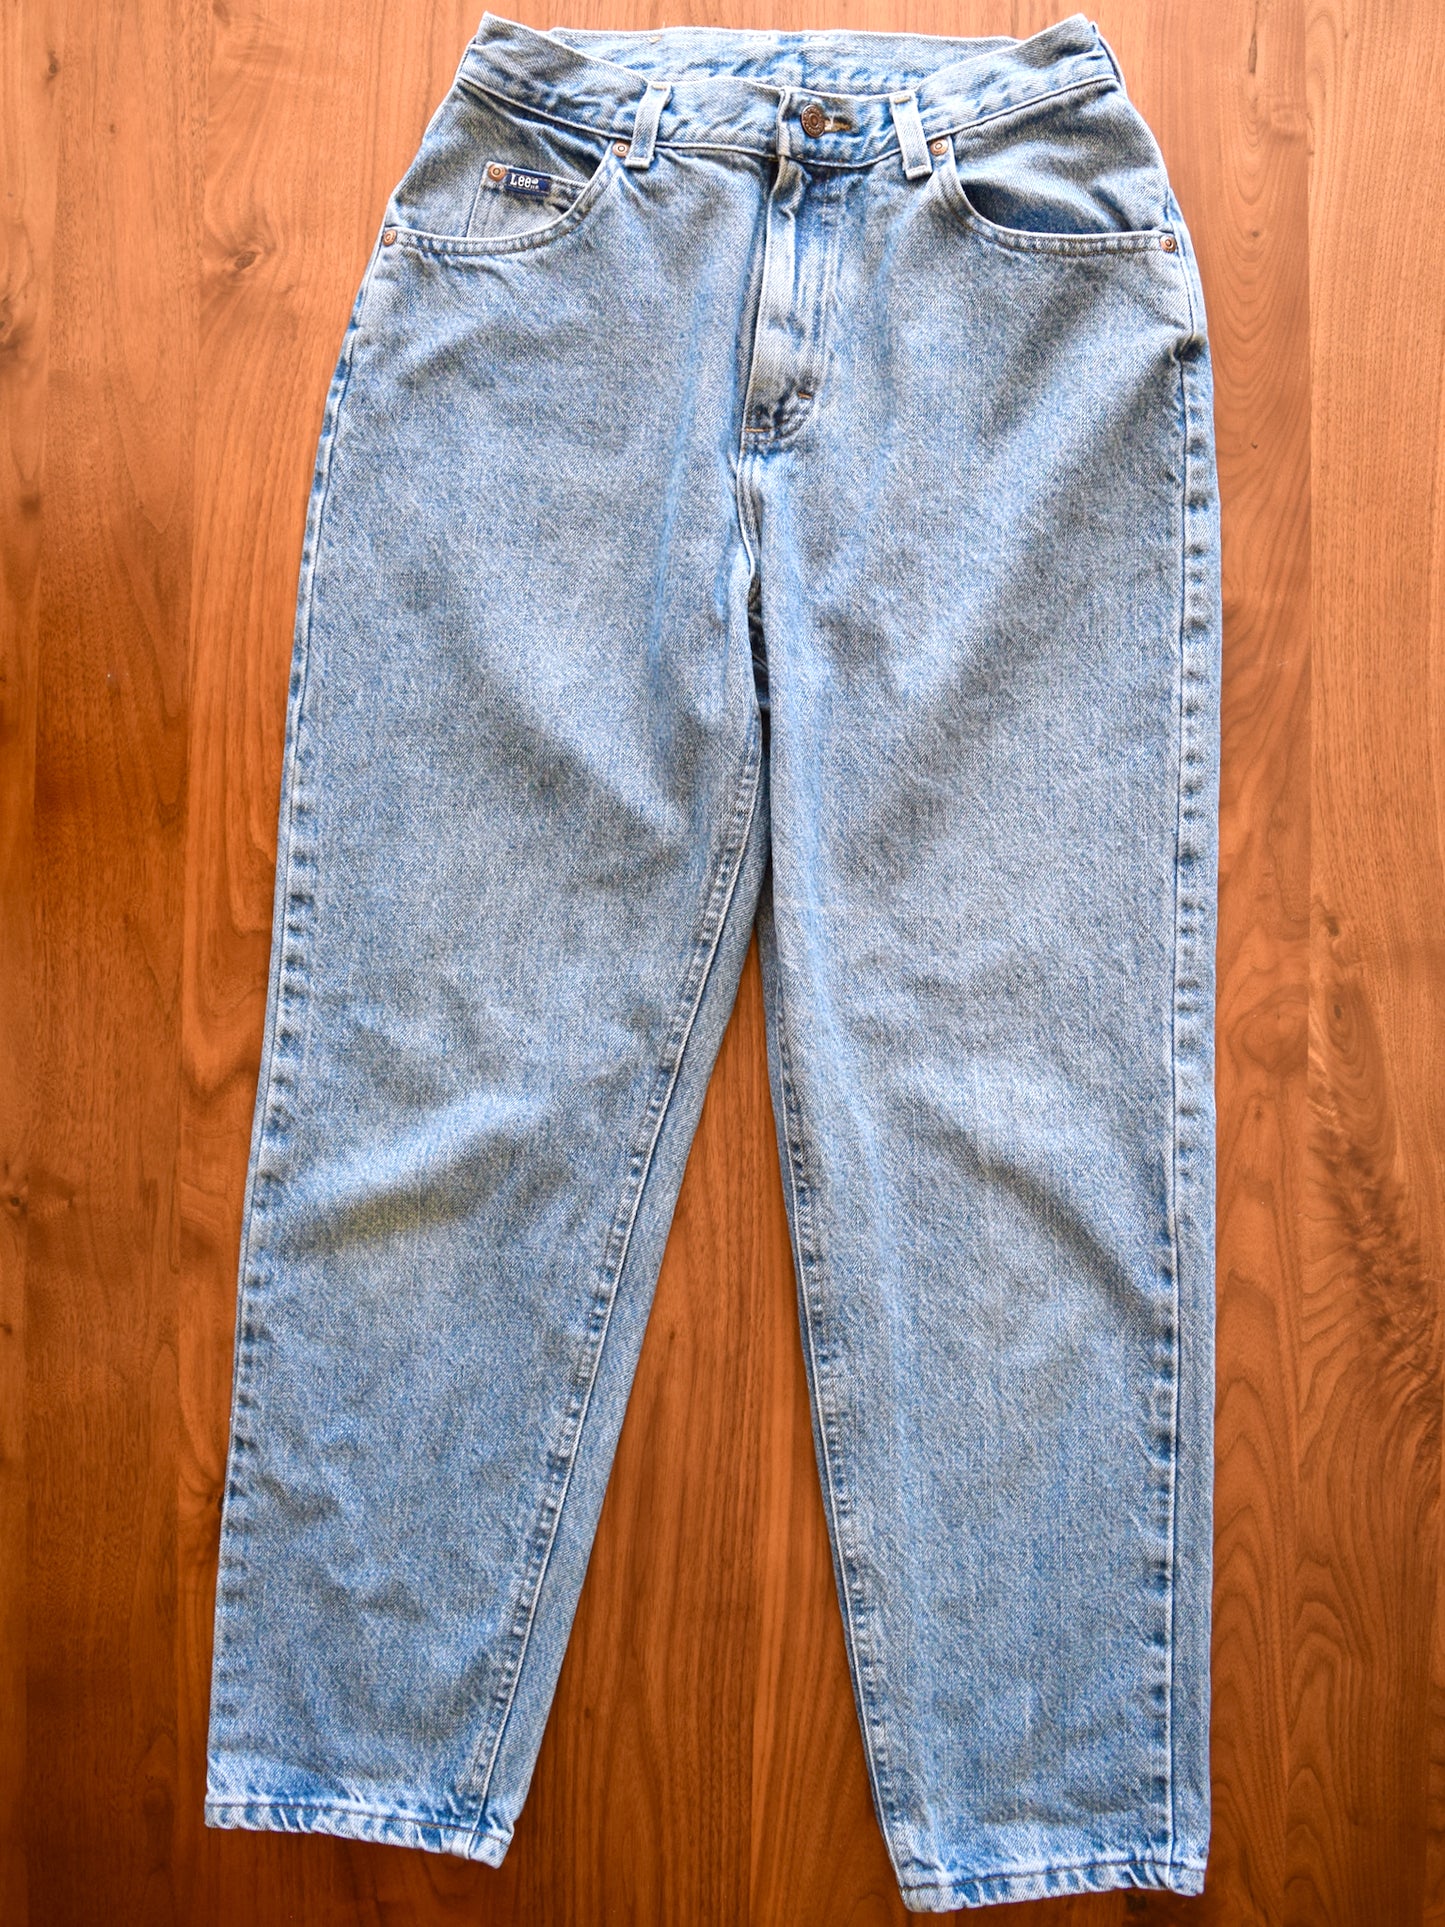 28 x 28 vintage 1990s high-waisted denim by Lee jeans in medium blue wash